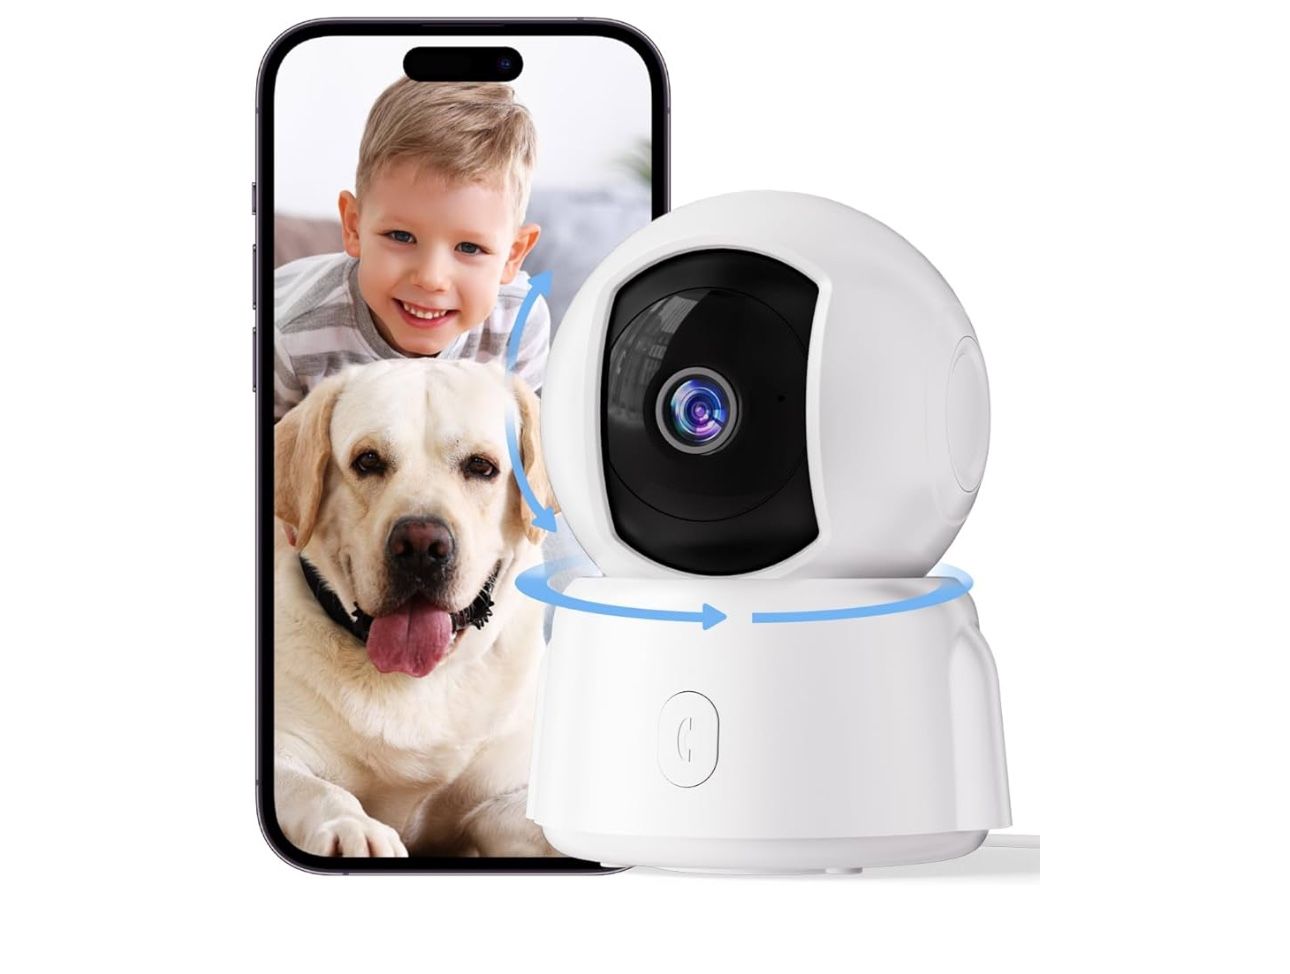 Golspark Indoor Security Camera 2K, Pet Camera for Home Security, Dog Cam Pan/Tilt, Motion Tracking, 2-Way Audio, Night Vision Baby Monitor, Siren Ale